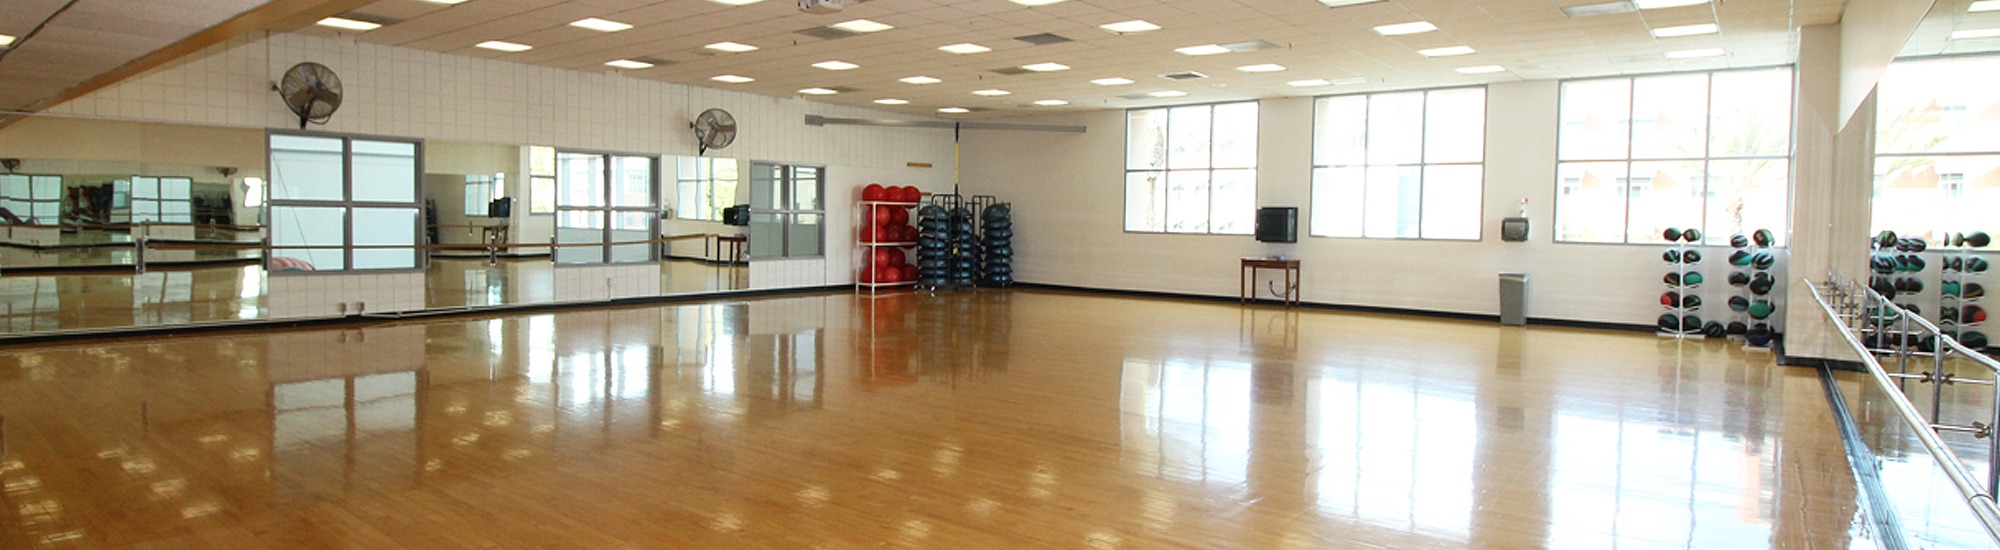 Multipurpose studio with wood floors and mirrors, fitness equipment agains the walls